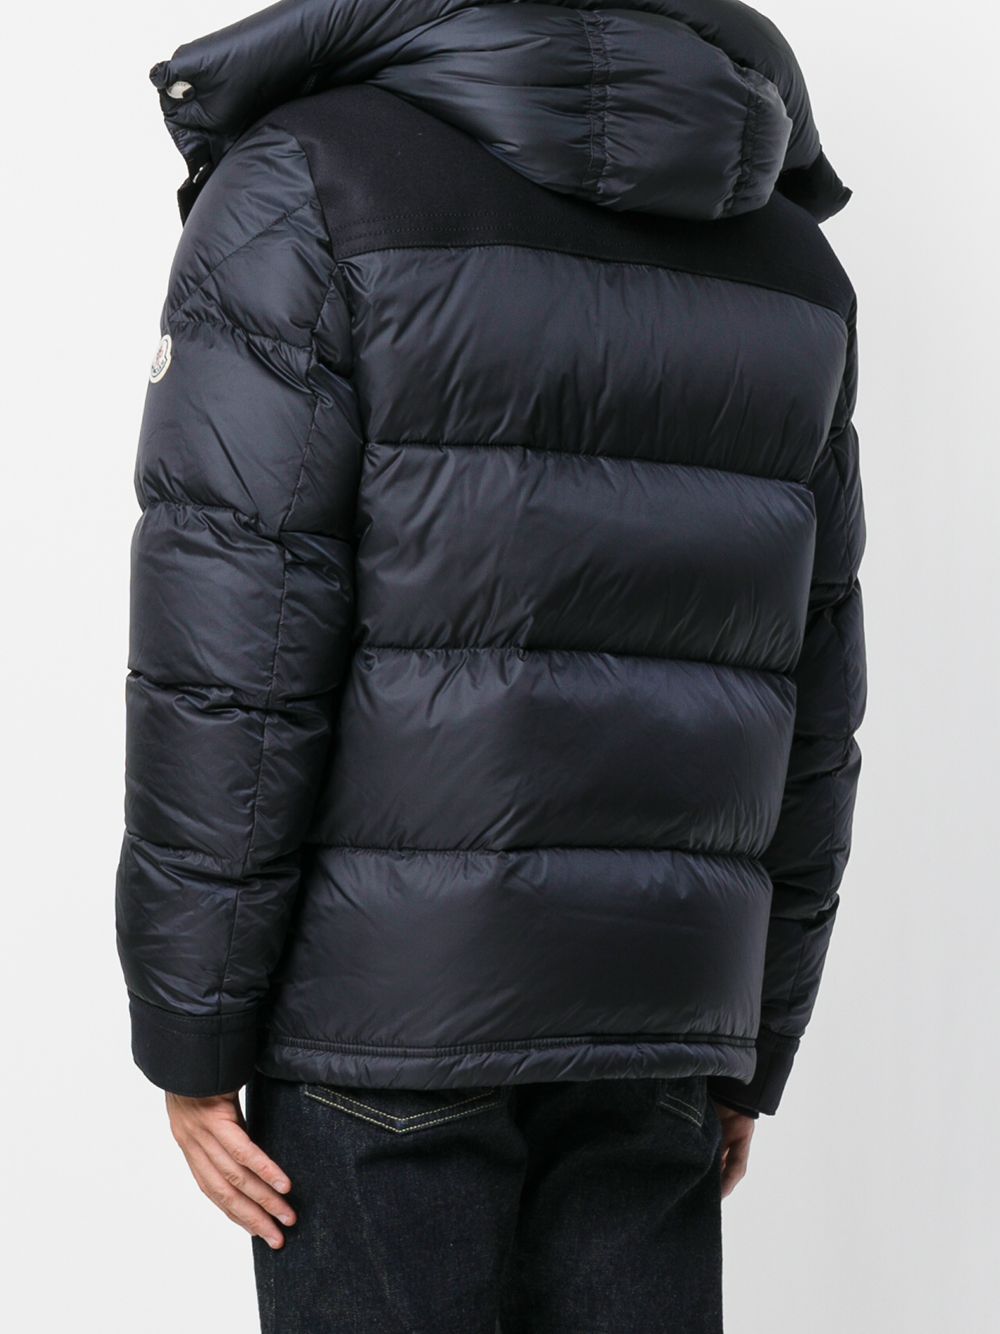 Moncler Rillieux Jacket $1,890 - Buy AW17 Online - Fast Delivery, Price